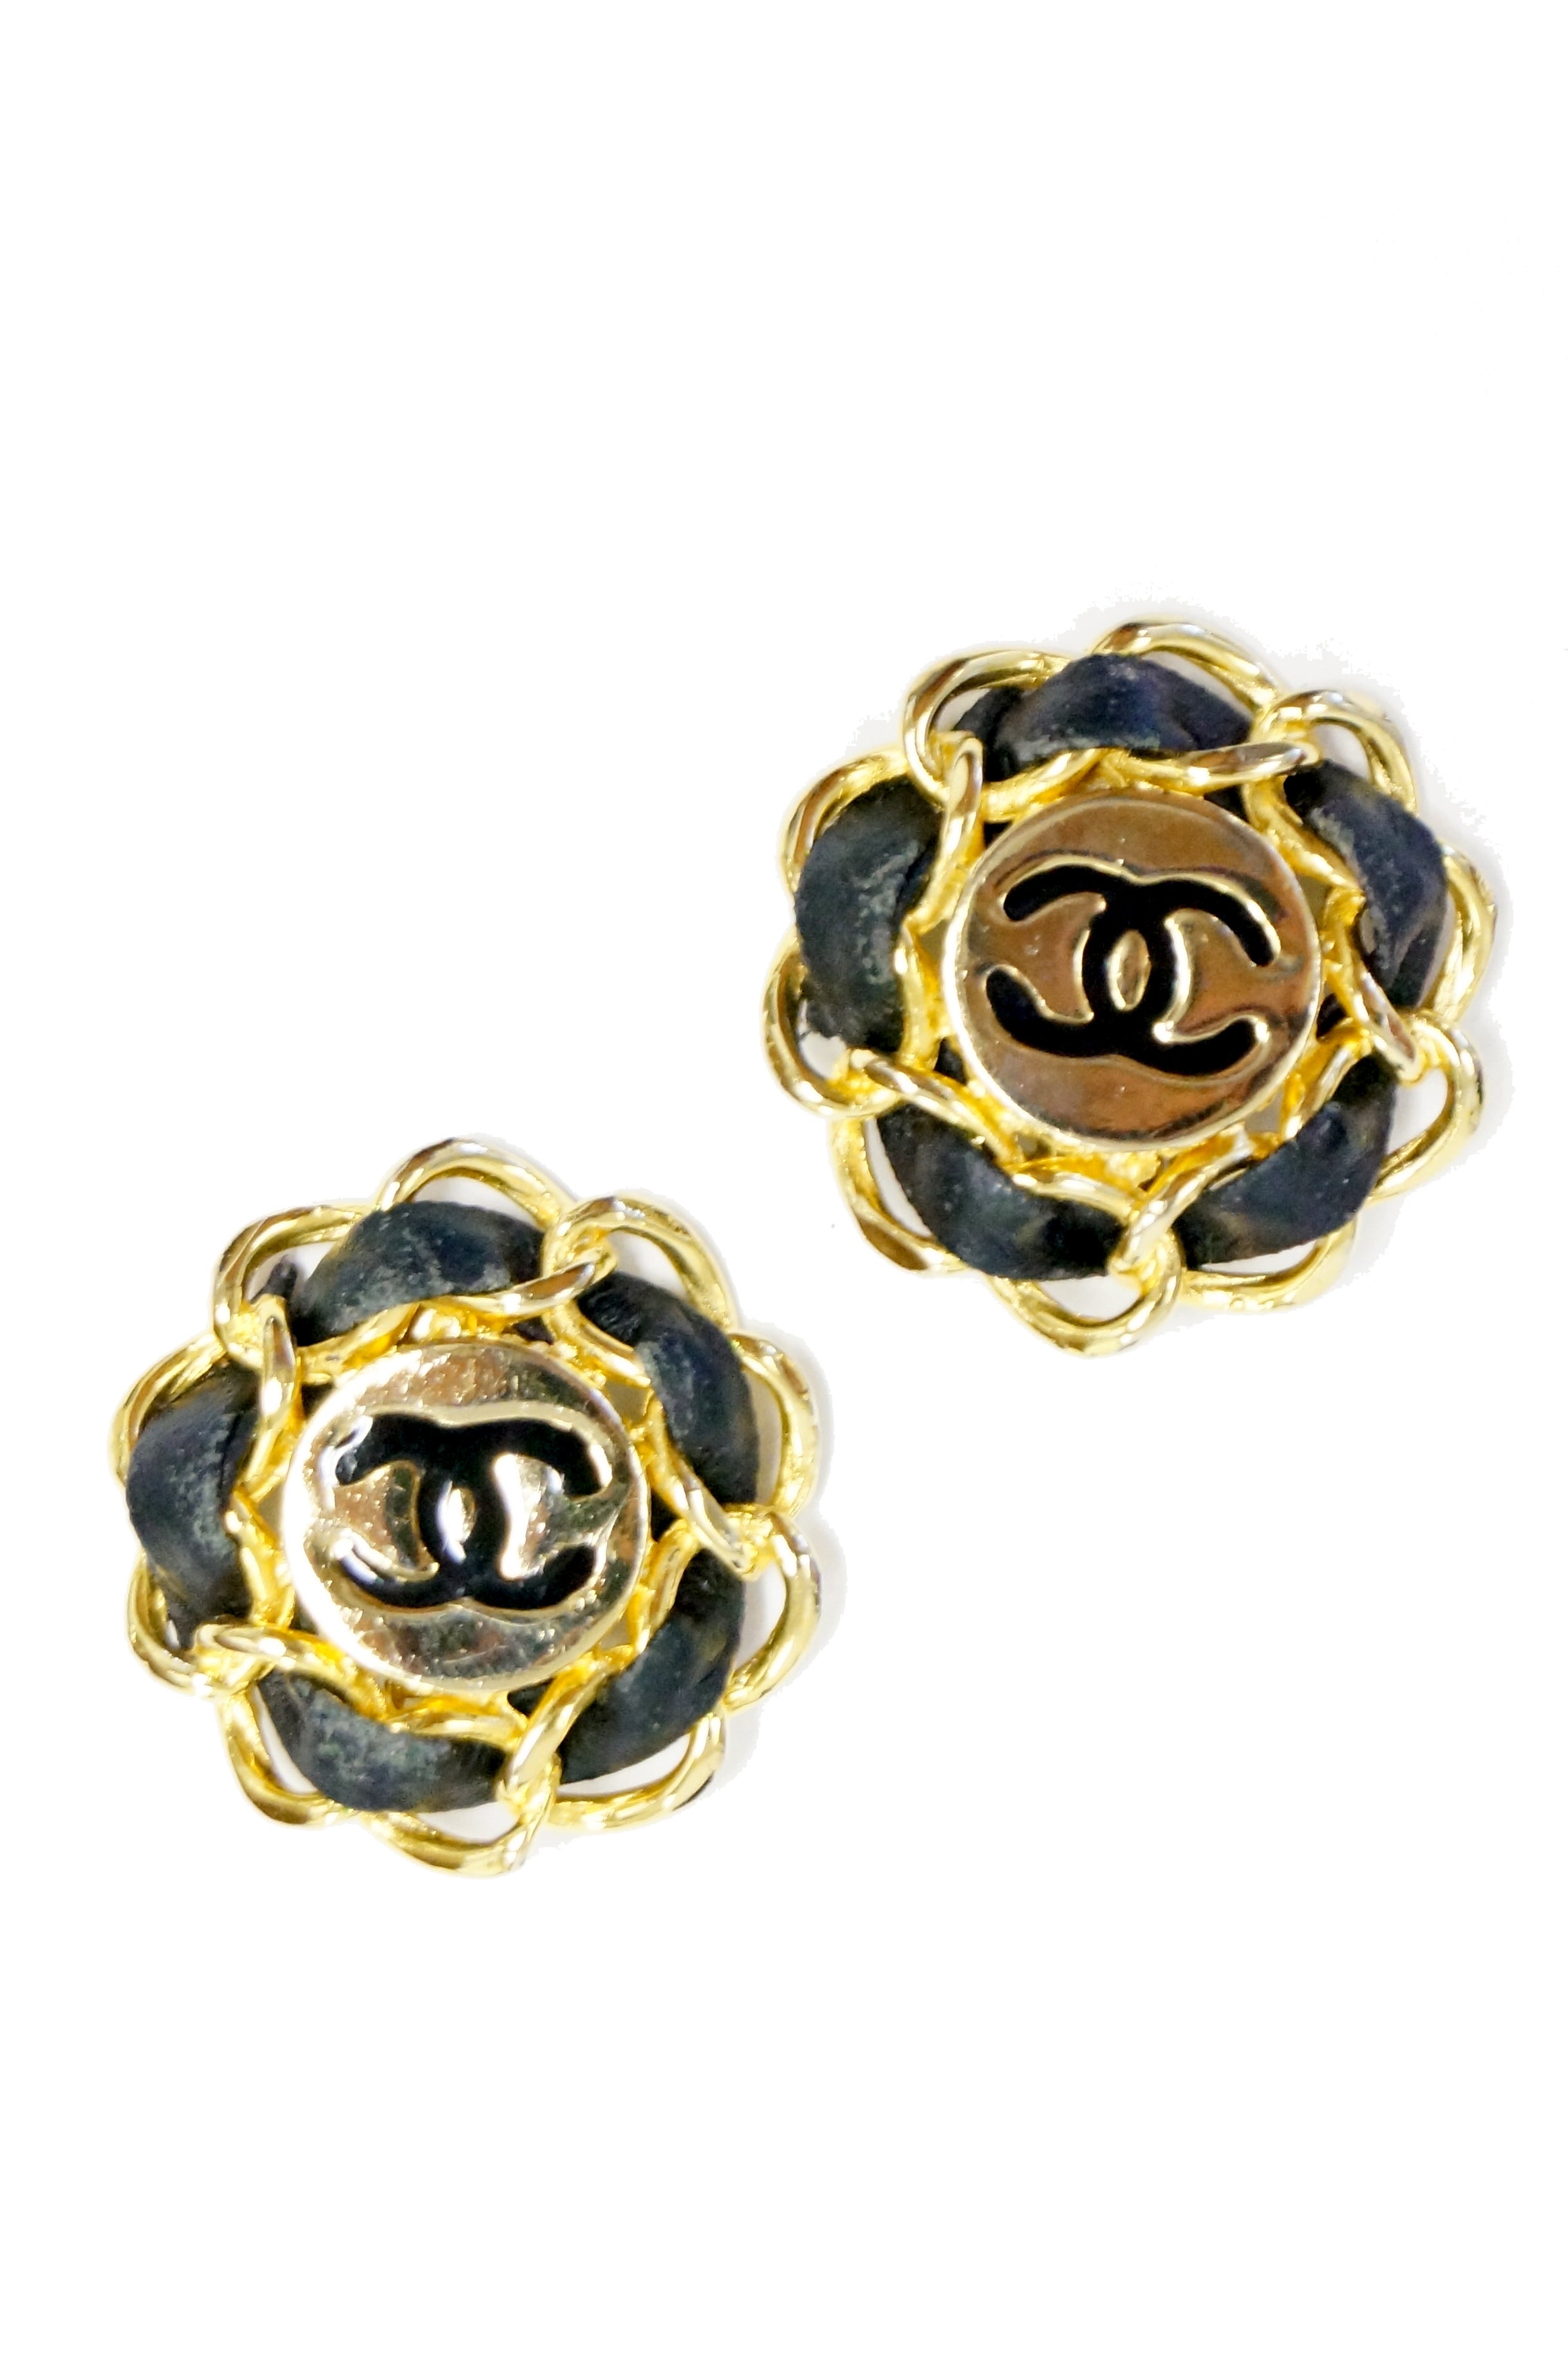 Chanel Gold-Tone Clip-On Cc Earrings Costume Earrings - 2 Pieces